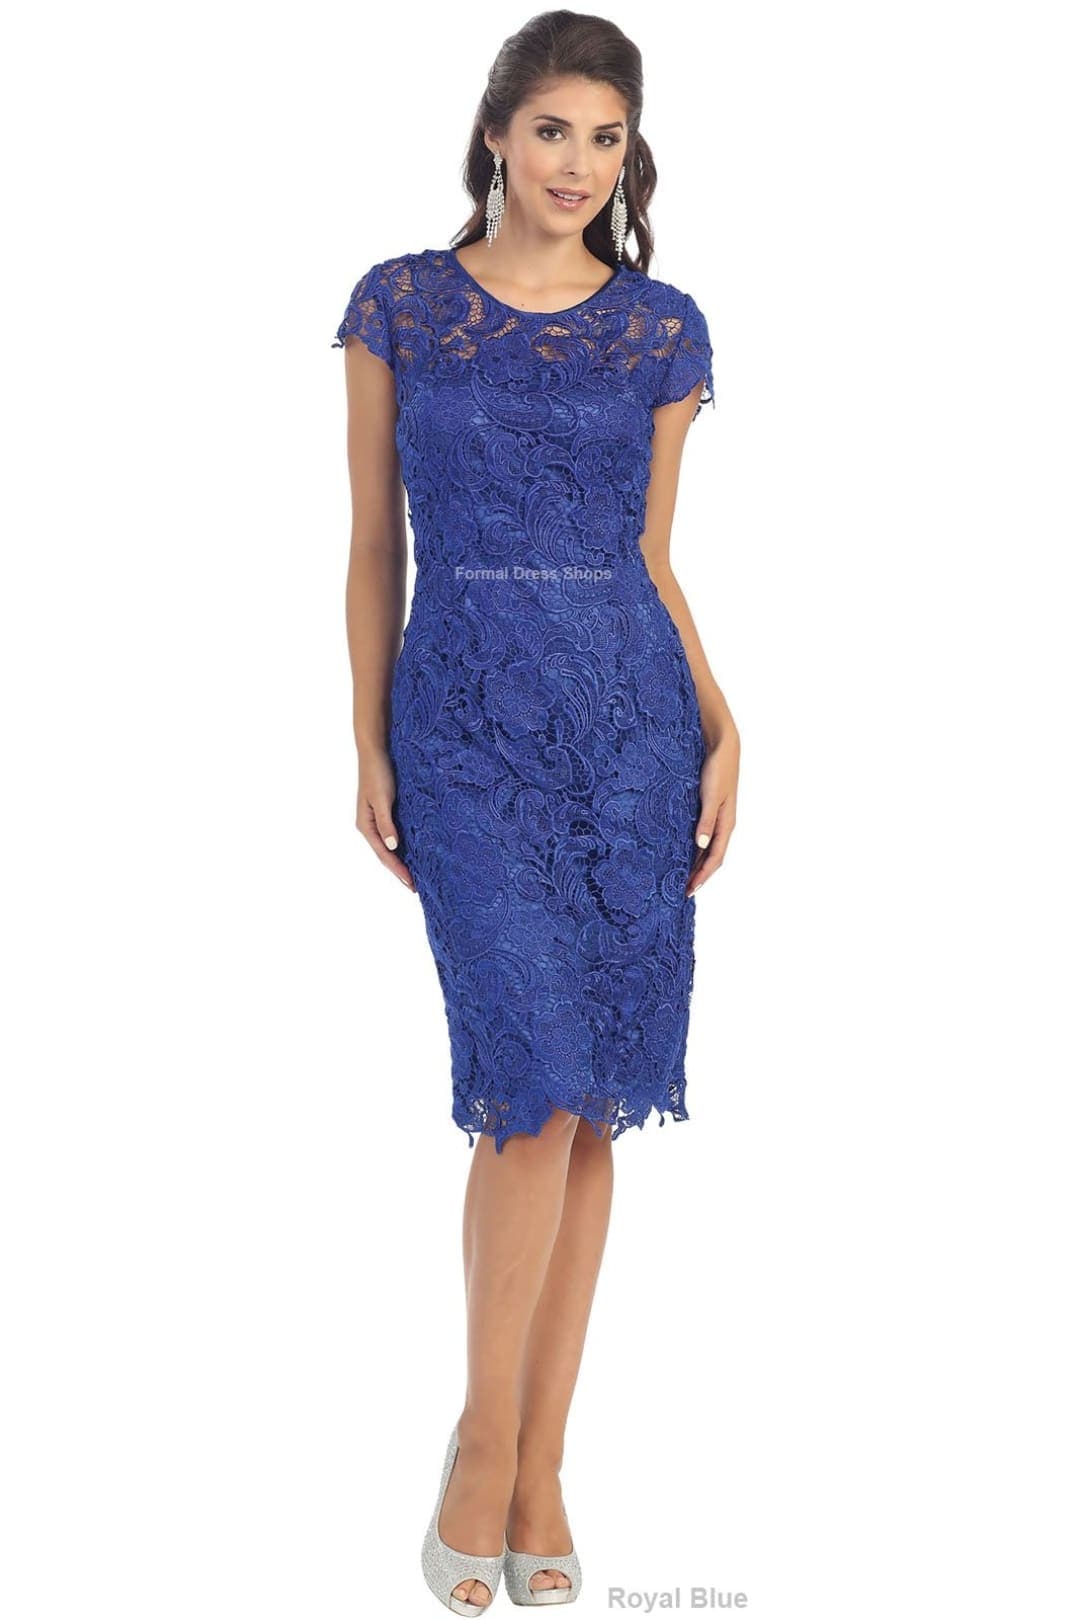 Classy Short Mother of the Groom Dress - Royal Blue / 3XL